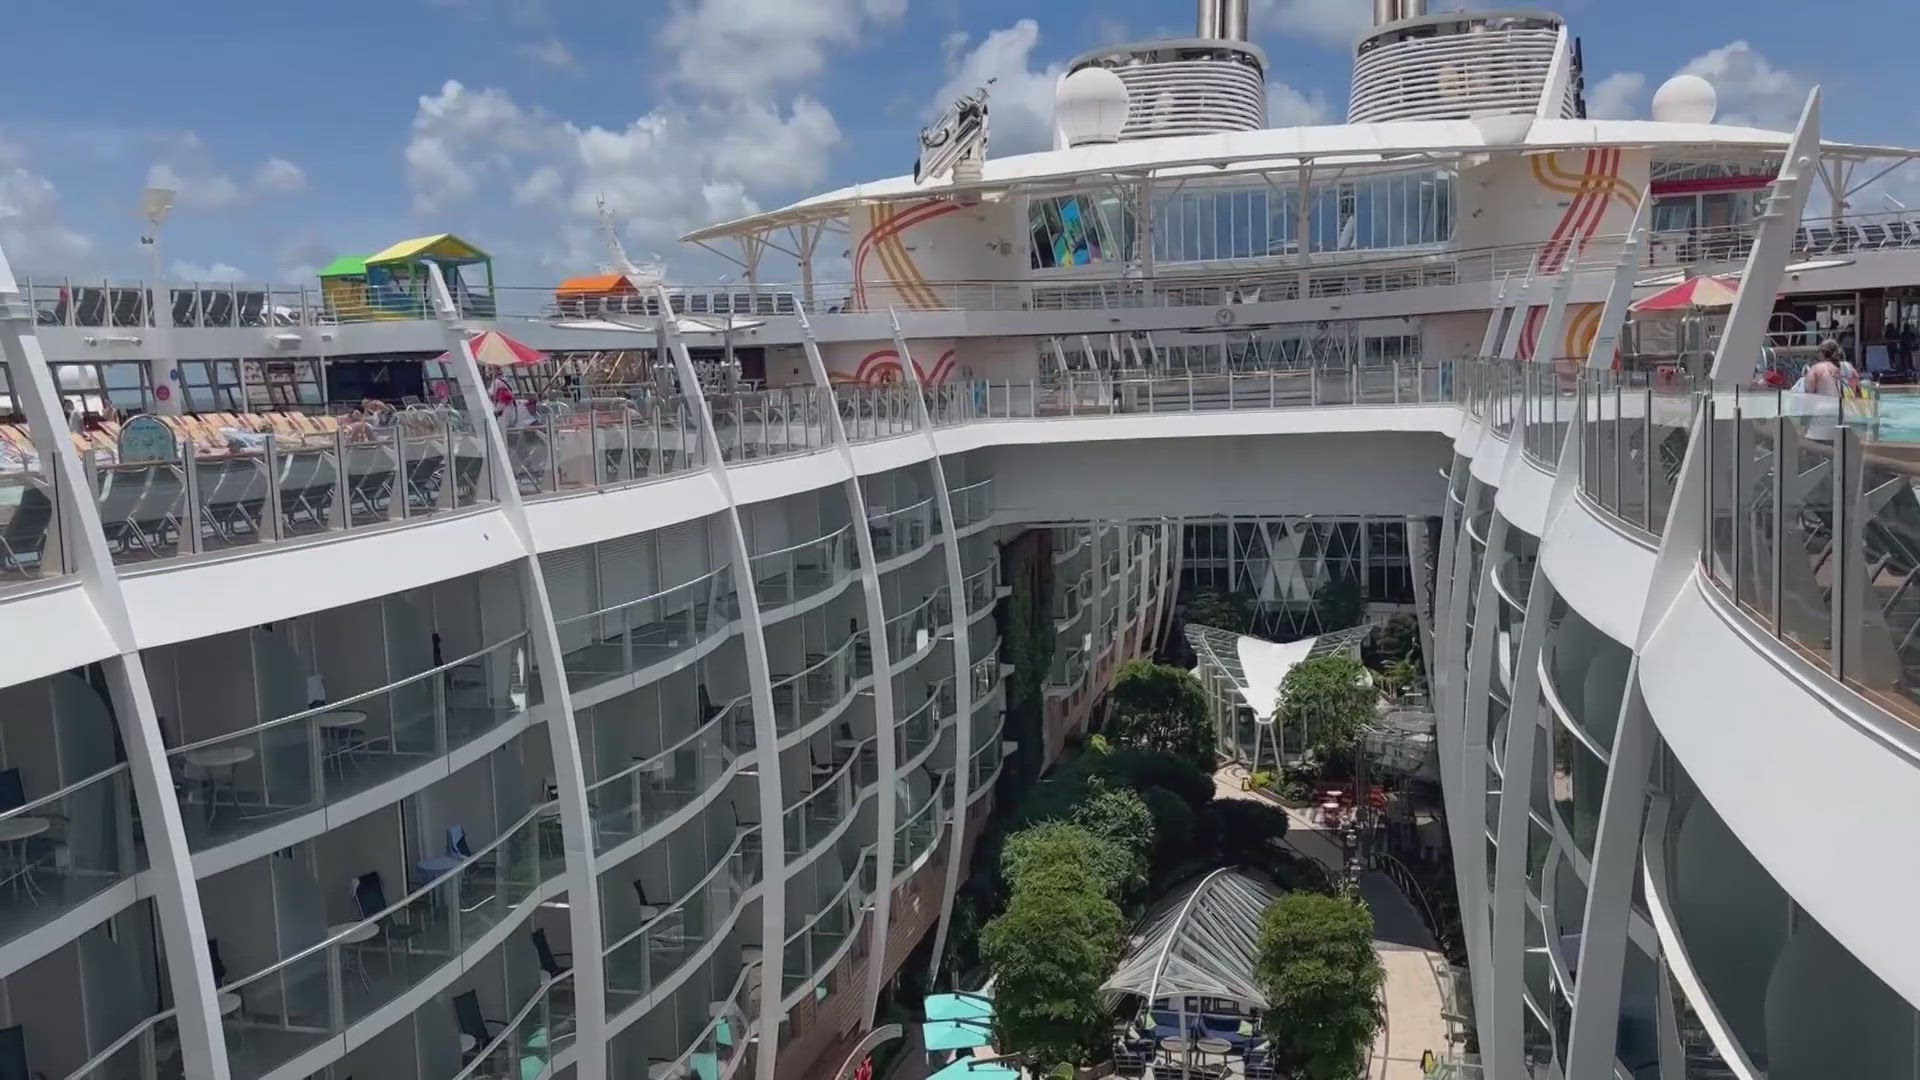 Royal Caribbean, Princess, Norwegian, Carnival and Disney cruise lines confirmed to KHOU 11 News they're altering the path of some of their ships.